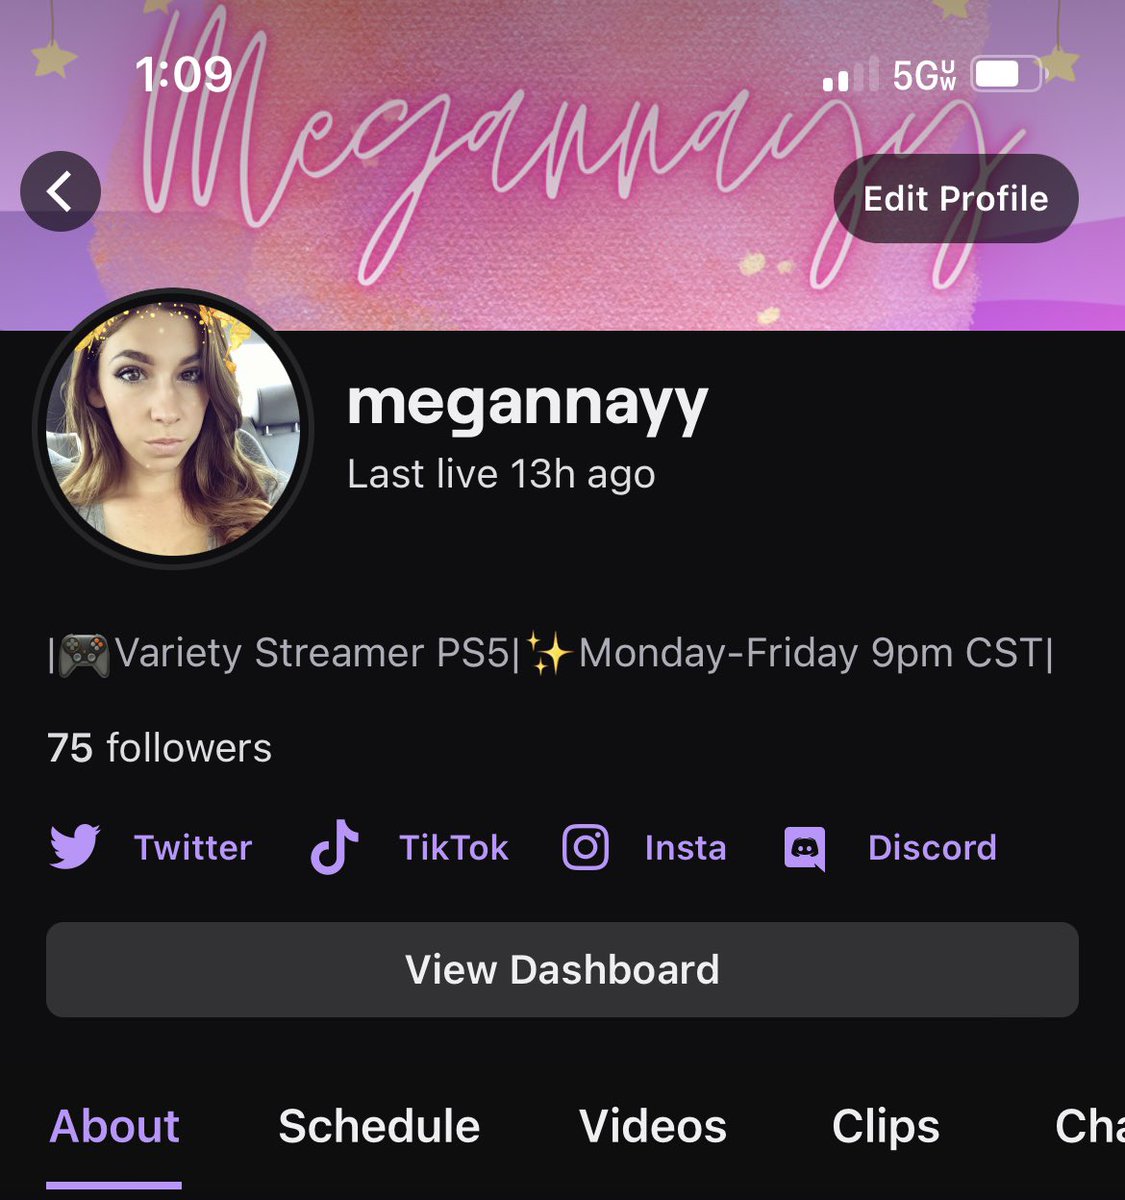 Slowly but surely build my “brand” and doing my best to make things cohesive. Come join me on twitch and see what’s changed. #smallchanges #affiliate #streamer #gamergirl #gamers #twitch #FinalFantasyVII @twitch